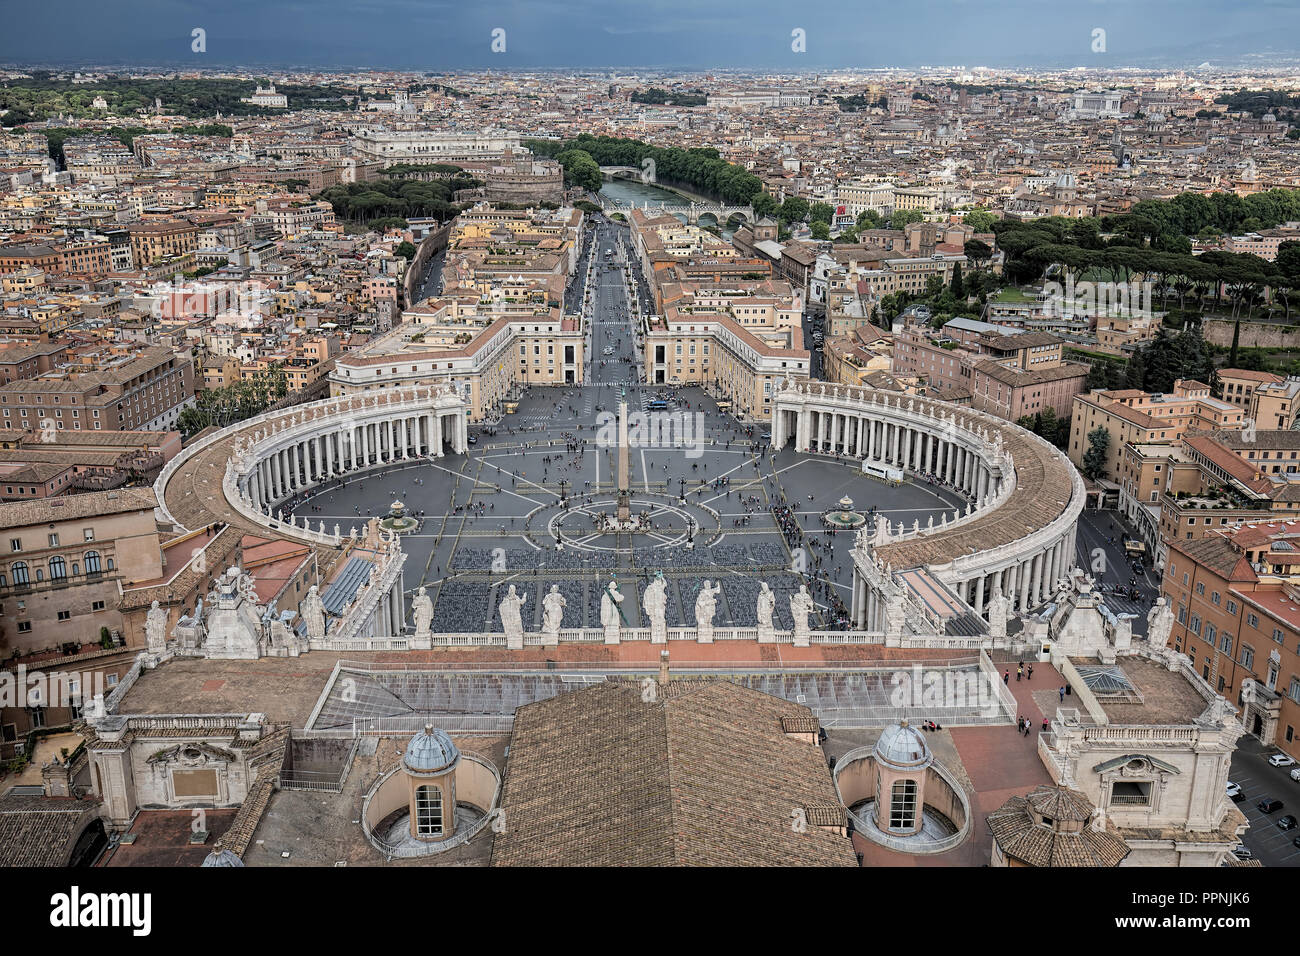 View of St. Peter's Square and Rome from Dome of St. Peter's Basilica Stock Photo